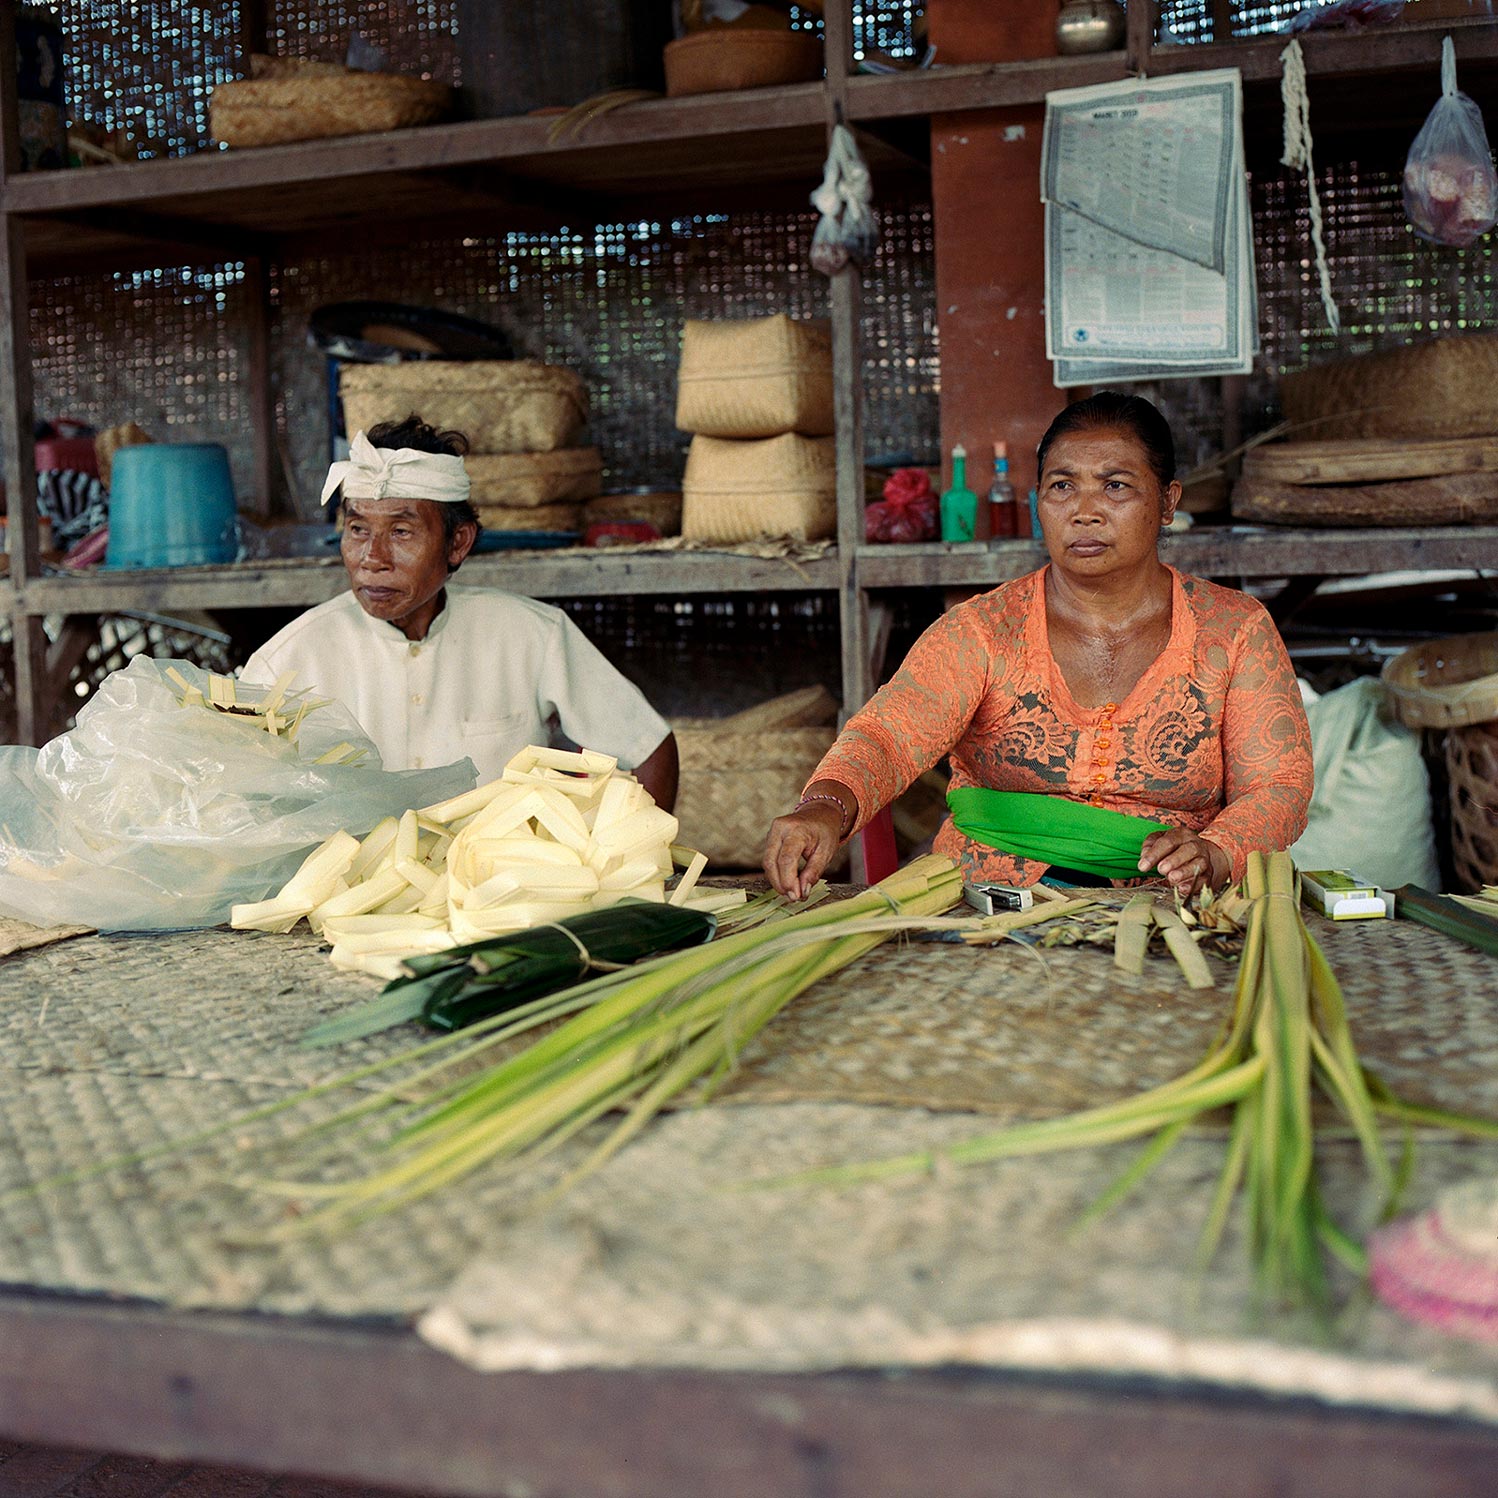 Wife and husband making Canang Sari Offerings for local festival.